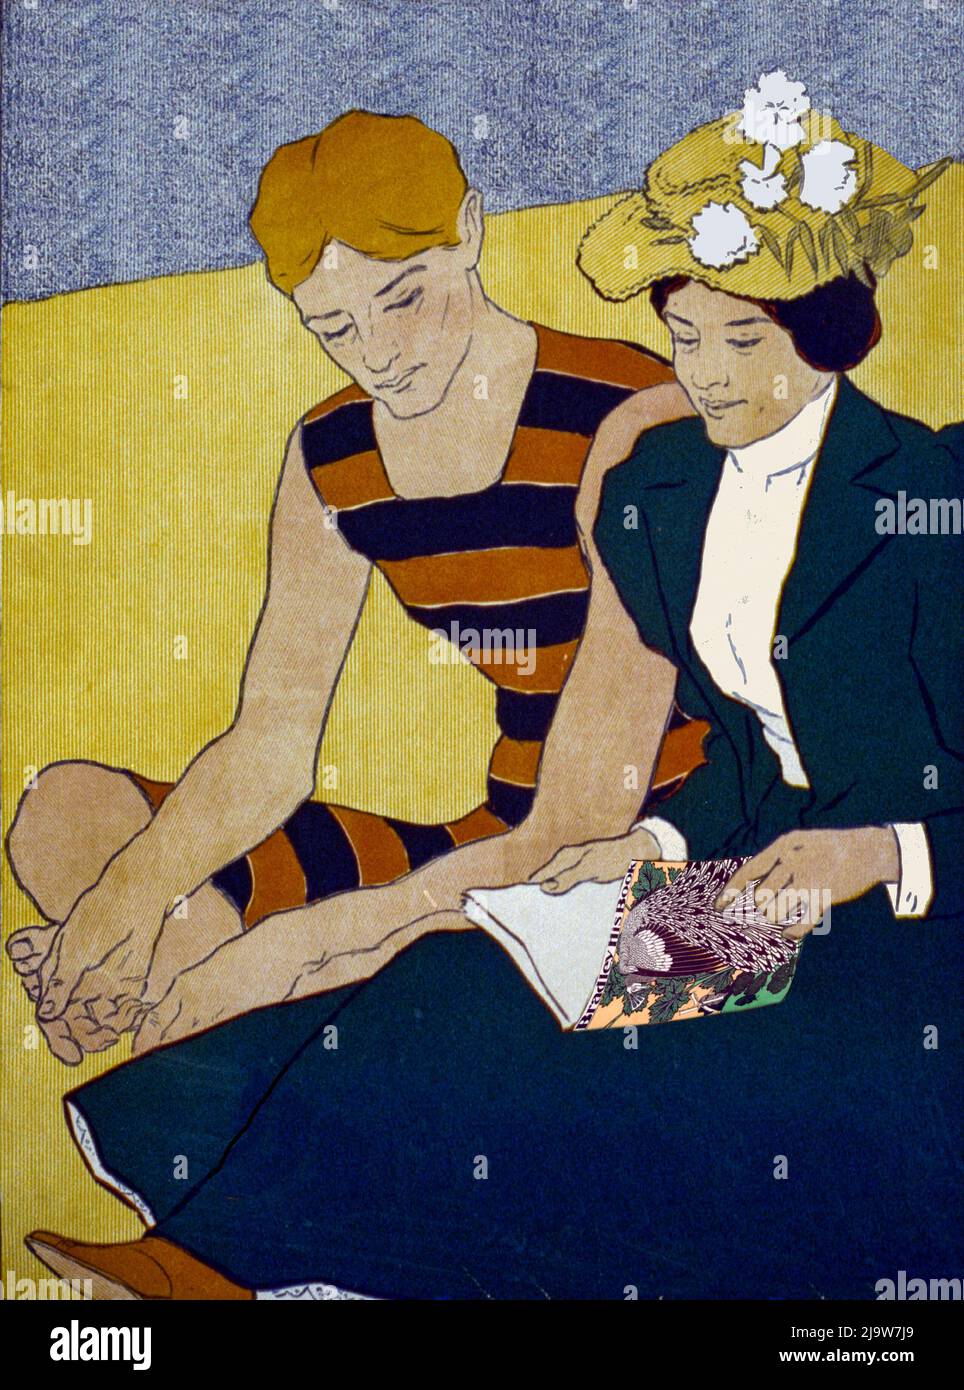 An illustration of a young man in a swim suit and young woman on a bathing beach, with the latter is fully clothed and reading book. The image by Joseph J Gould (1880-1935) is a detail from a poster for Lippincott's, an American monthly literary magazine published in Philadelphia from 1868 to 1915. Stock Photo